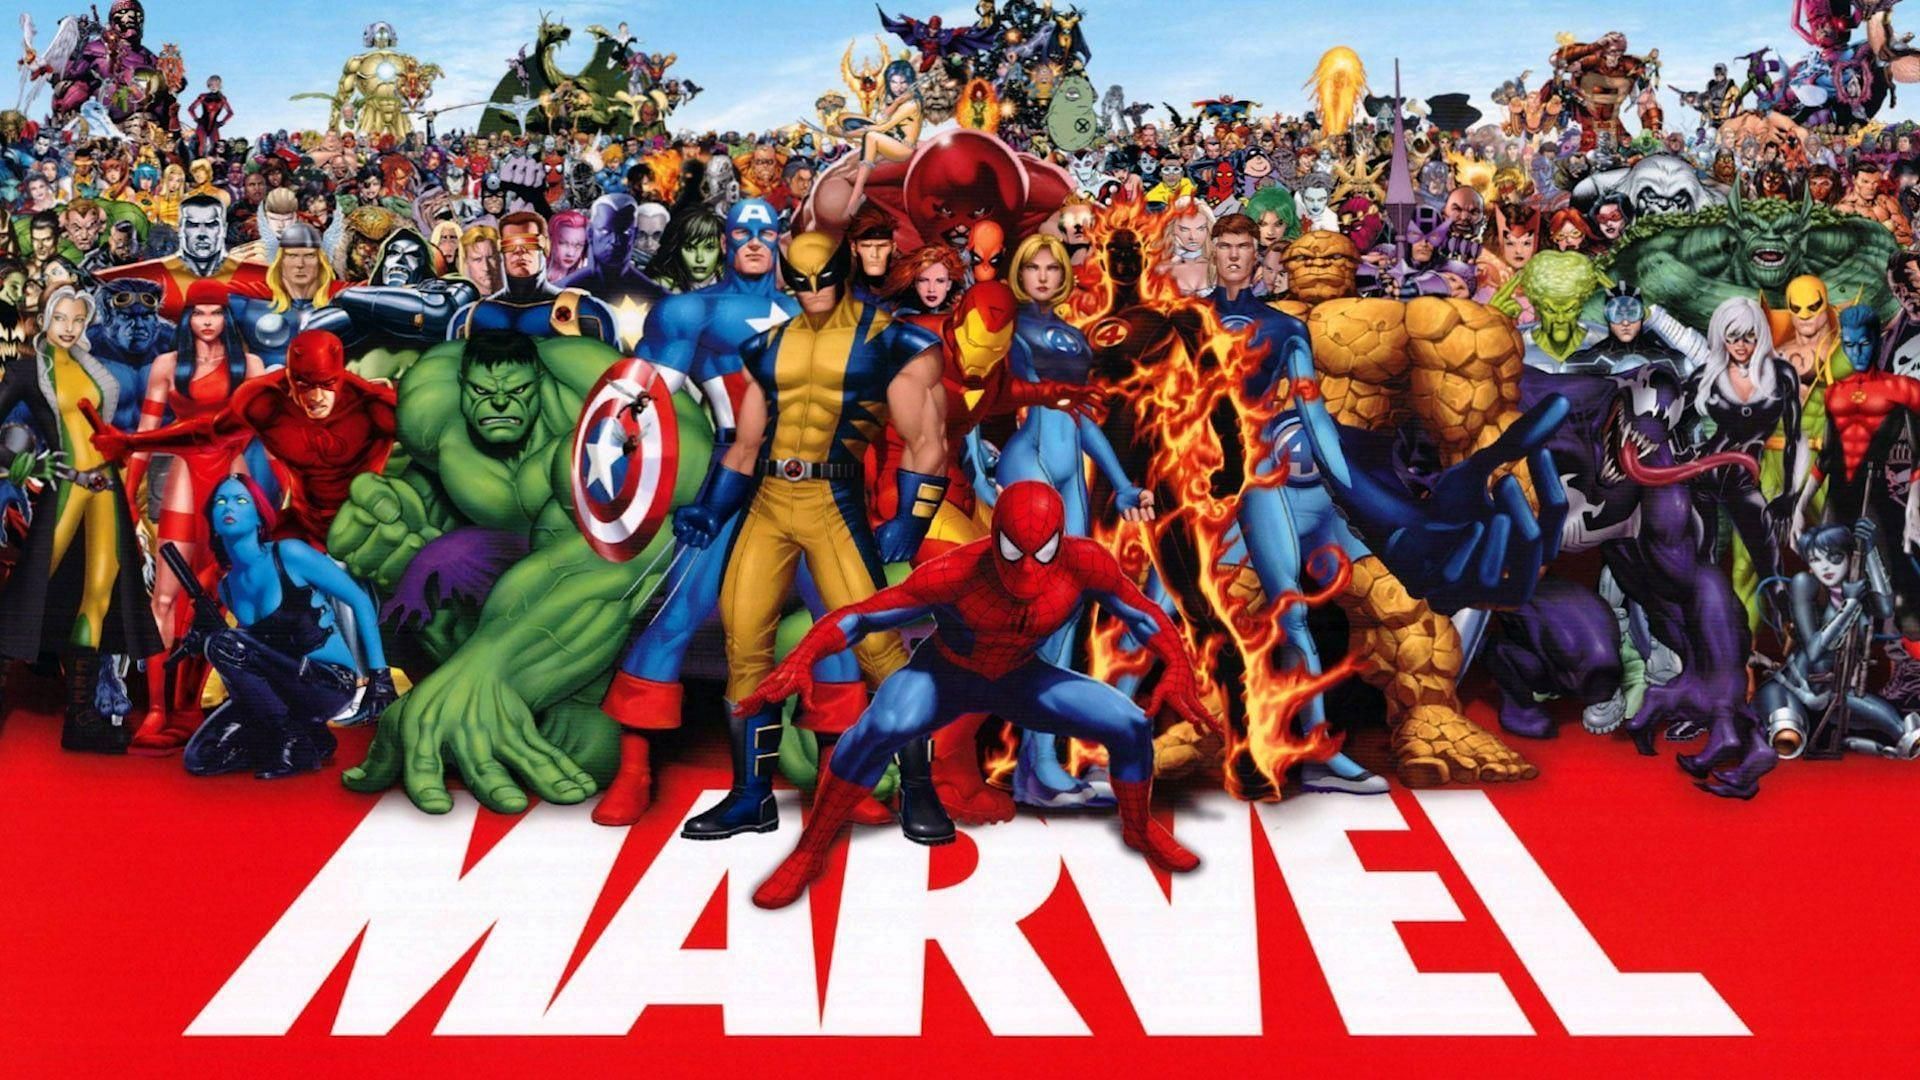 10 Marvel Heroes who don't have any powers, ranked by strength